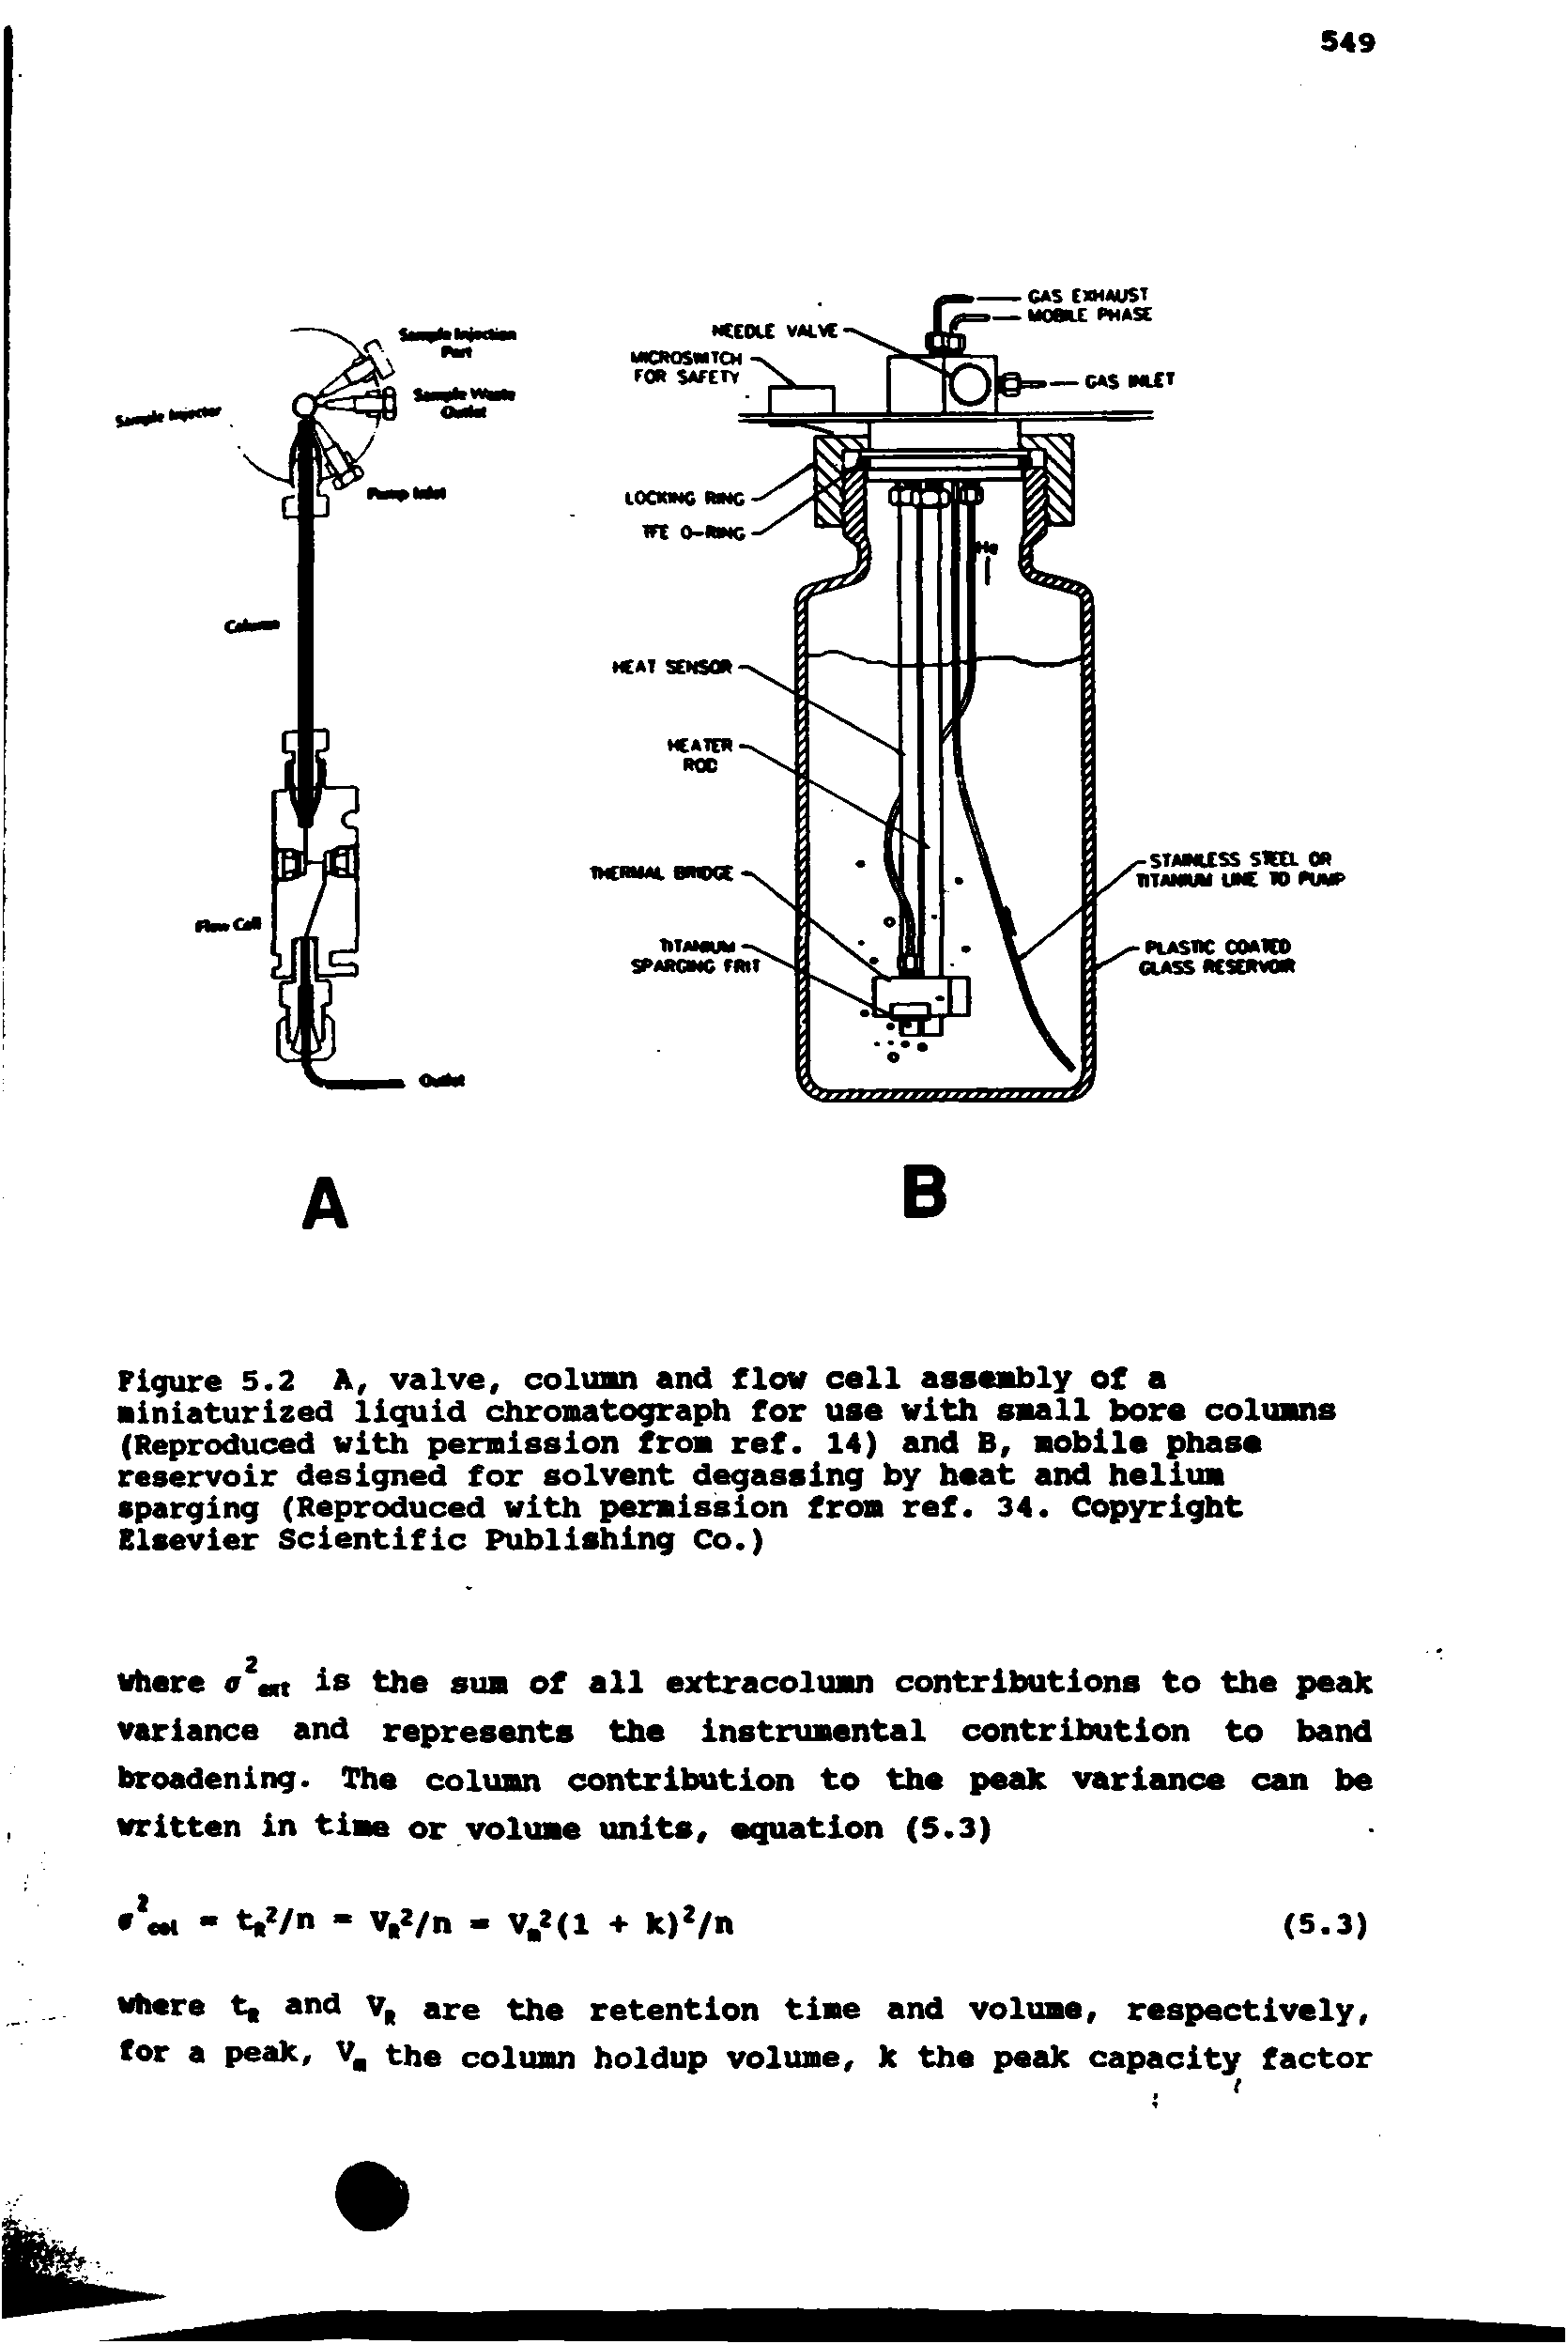 Figure 5.2 A, valve, column and flow cell asseidily of a ainiaturized liquid chromatograph for use with small bore columns (Reproduced with permission from ref. 14) and B, mobile phase reservoir designed for solvent degassing by heat and helium sparging (Reproduced with permission from ref. 34. Copyright Elsevier Scientific Publishing Co.)...